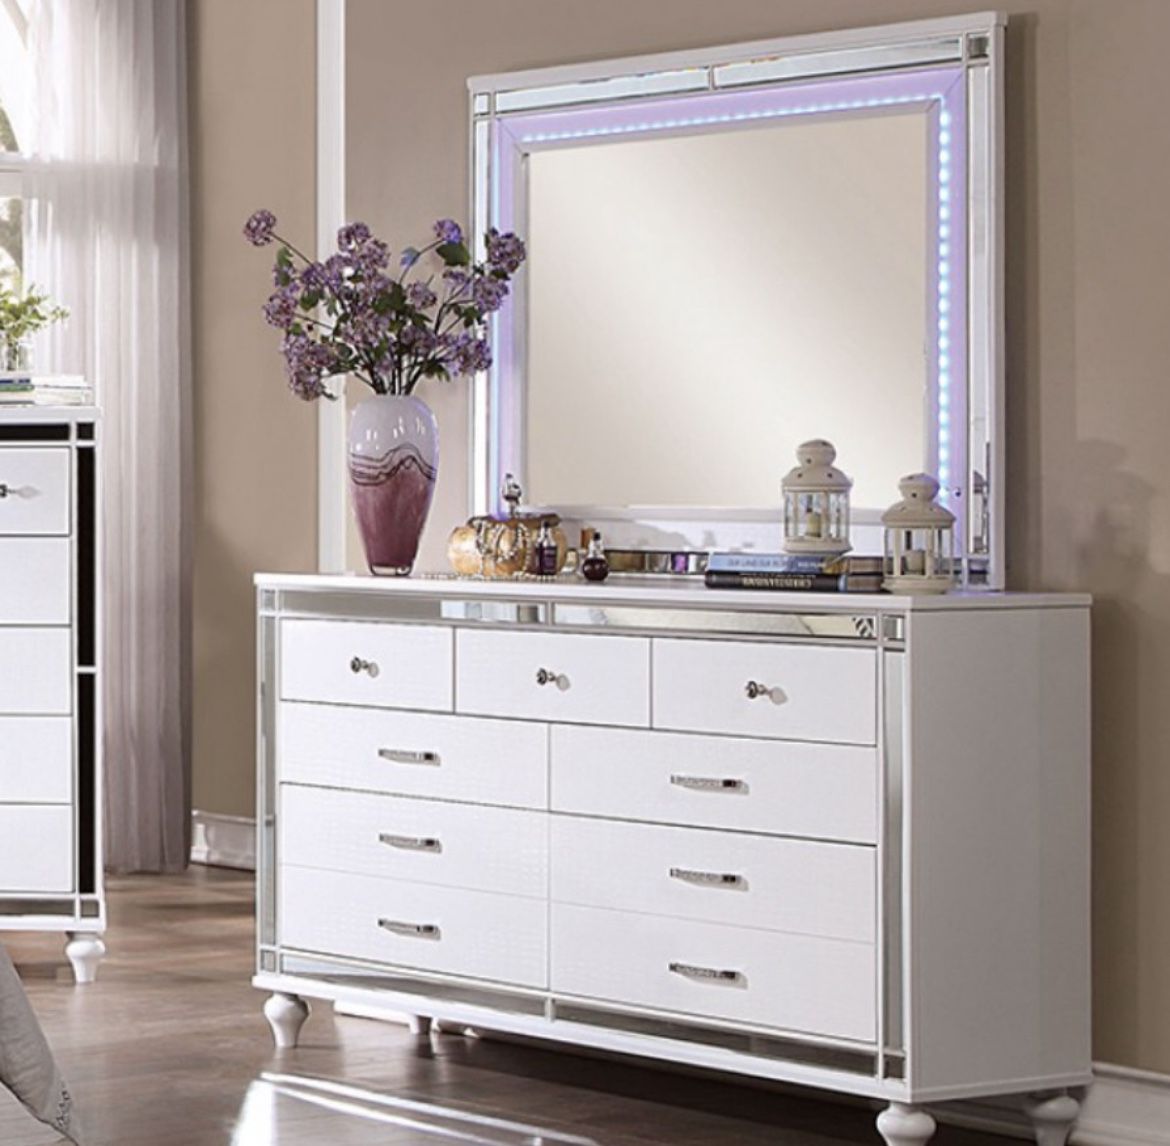 WHITE DRESSER!! 🔥Visit Our Showroom📍Apply Now✅ Delivery Express🚚Order Online💻